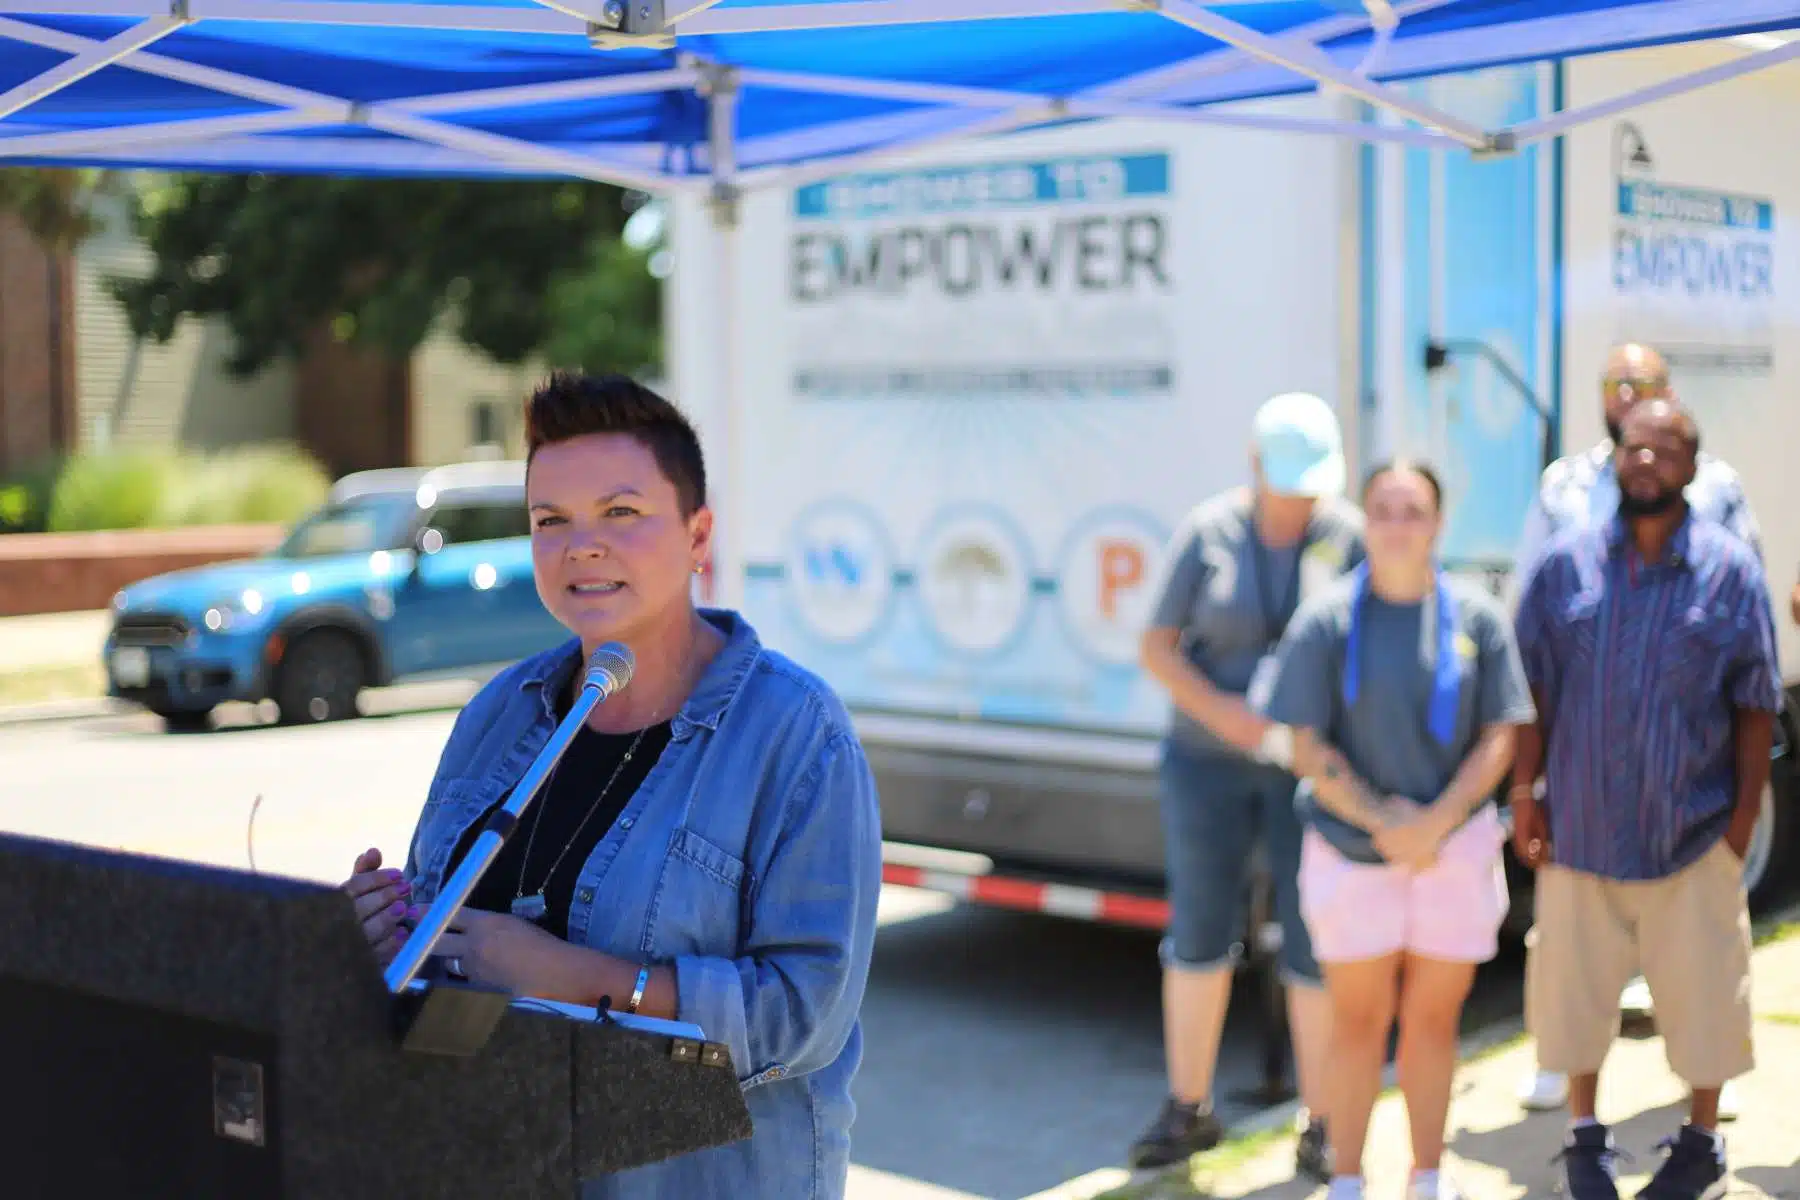 Shower to Empower offers relief and respite to those suffering homelessness